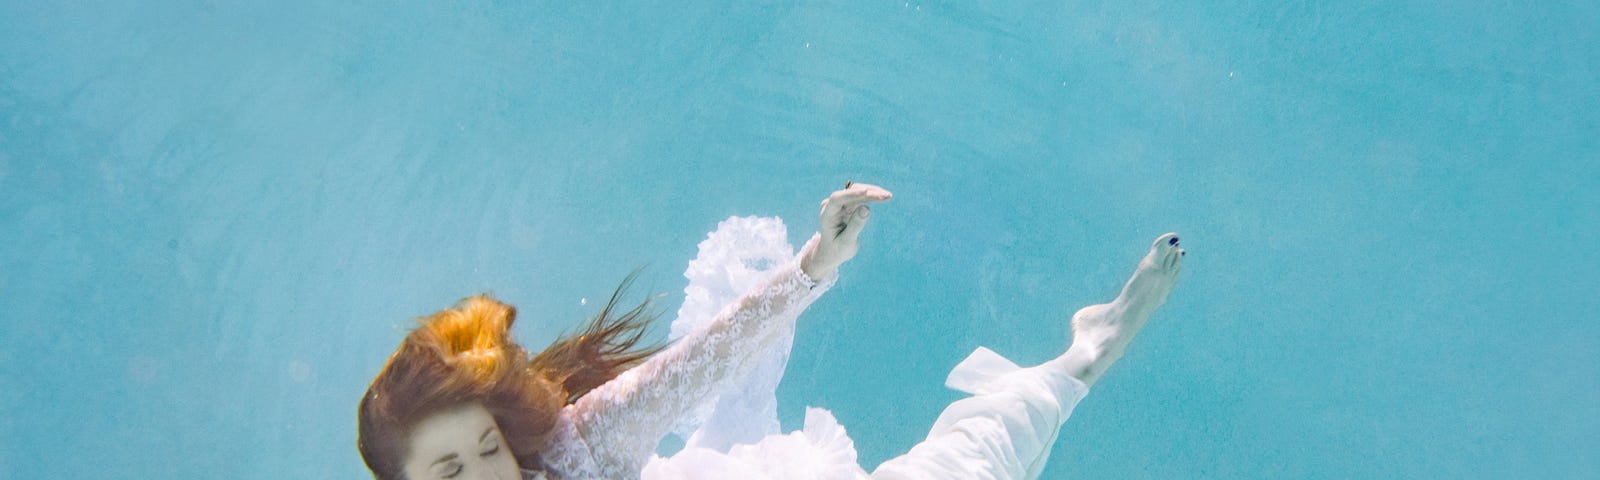 a woman dressed in white dress submerged under water dancing